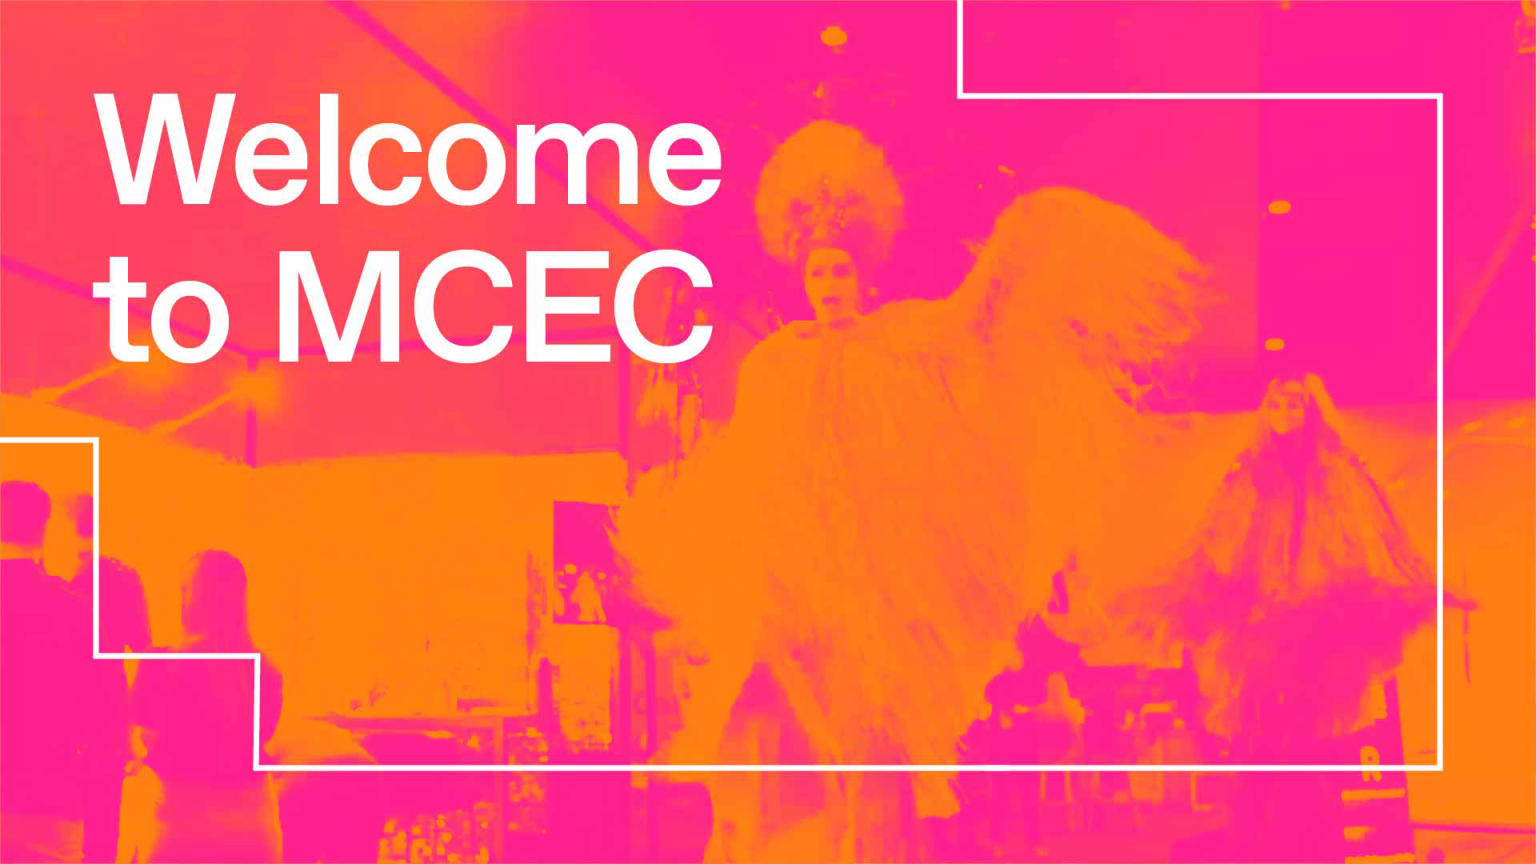 Welcome to MCEC text is displayed on a pink and orange treated photo of a performer. 